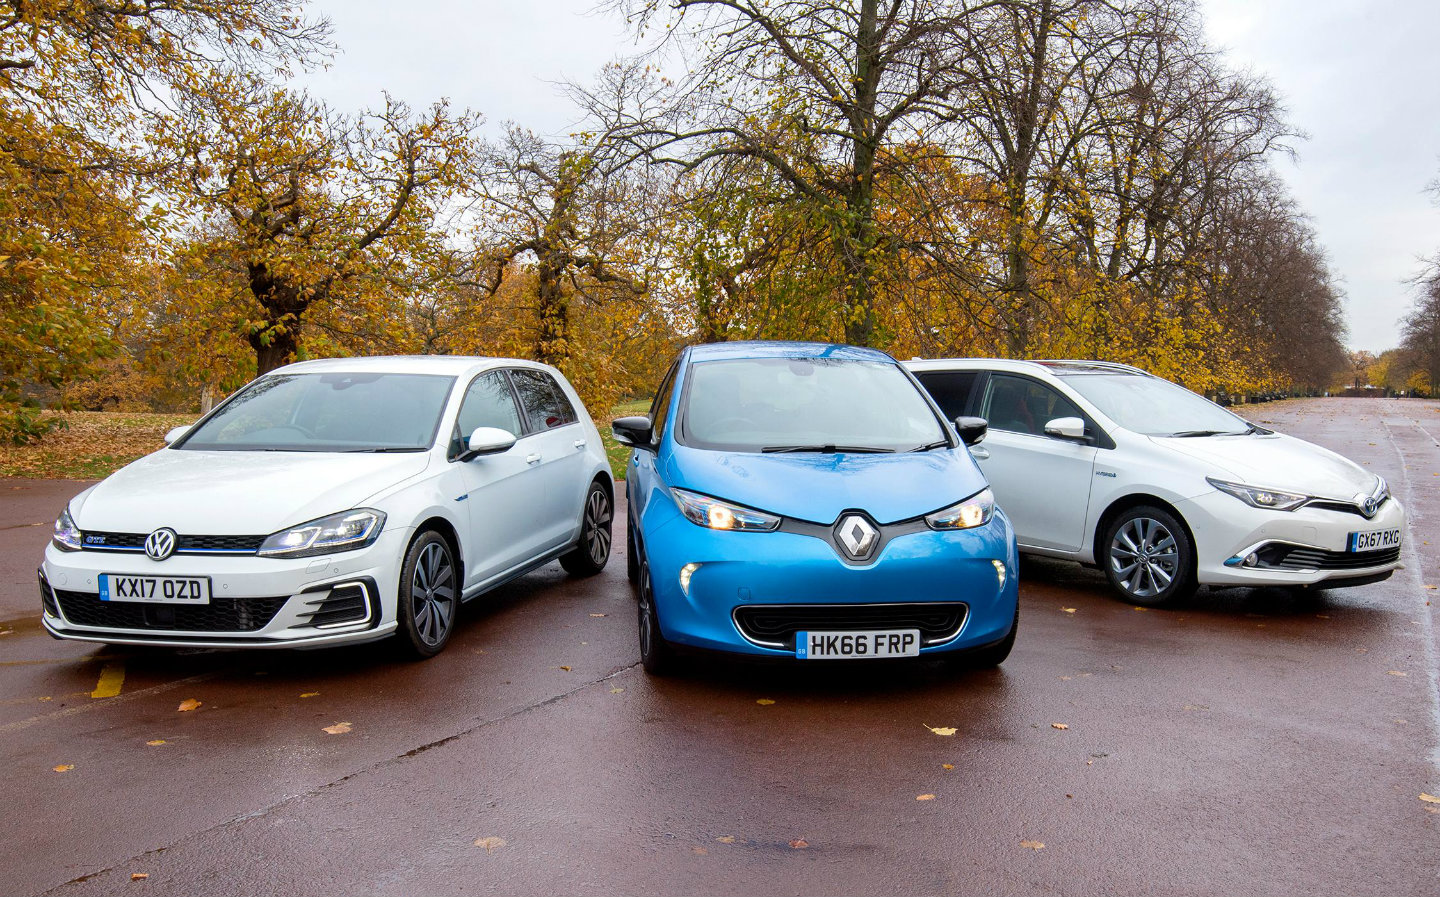 Time to ditch diesel? Comparing the costs of driving a hybrid, plug-in hybrid and electric car